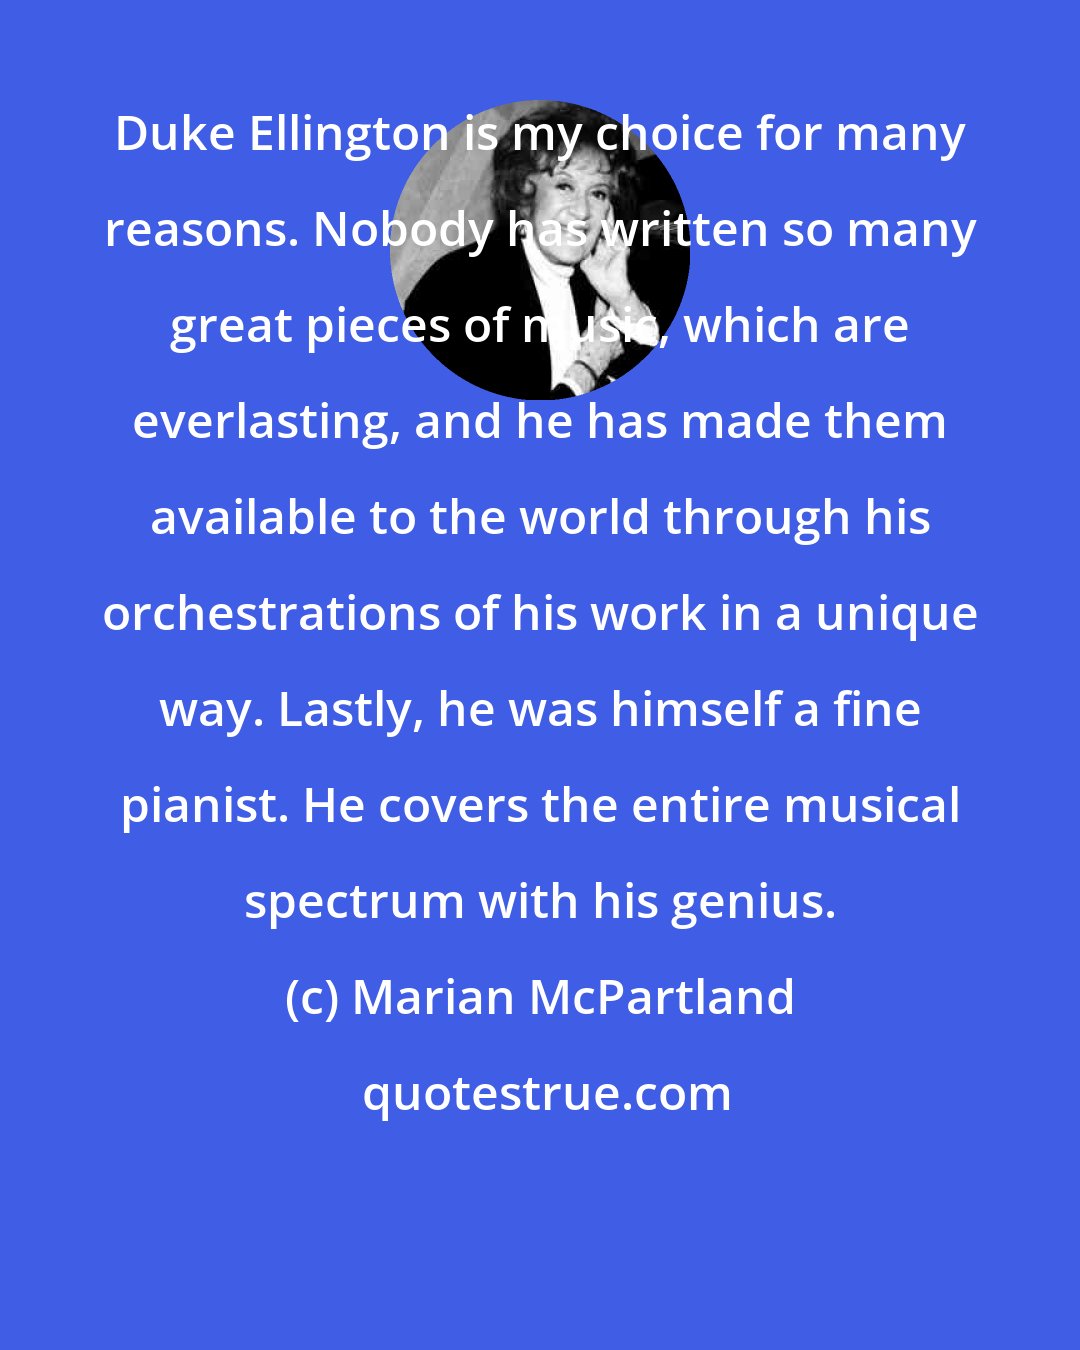 Marian McPartland: Duke Ellington is my choice for many reasons. Nobody has written so many great pieces of music, which are everlasting, and he has made them available to the world through his orchestrations of his work in a unique way. Lastly, he was himself a fine pianist. He covers the entire musical spectrum with his genius.